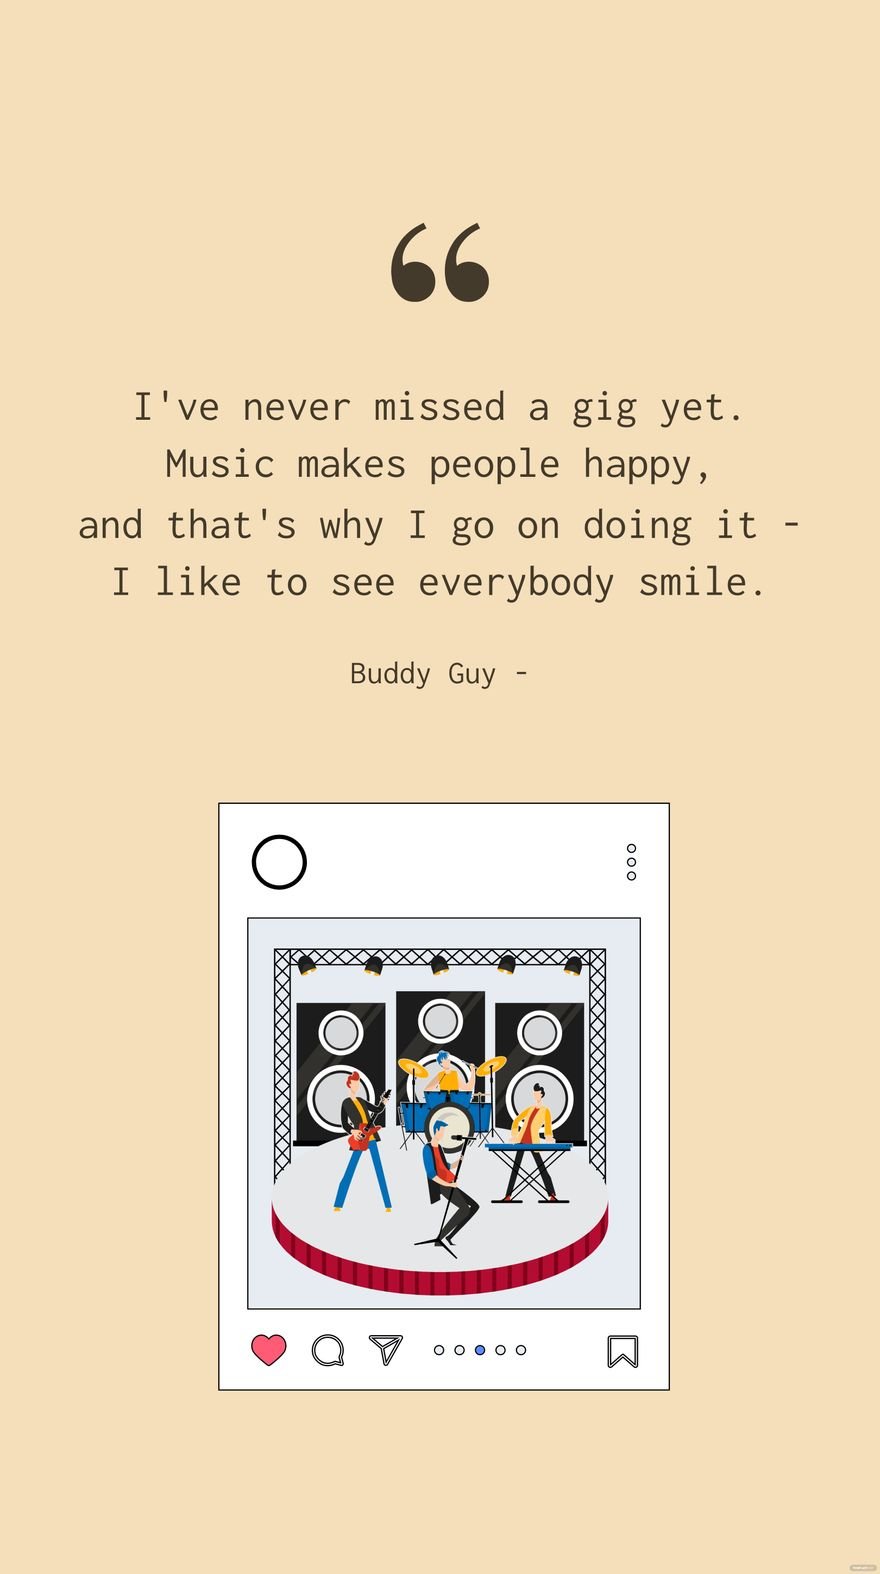 Buddy Guy - I've never missed a gig yet. Music makes people happy, and that's why I go on doing it - I like to see everybody smile.